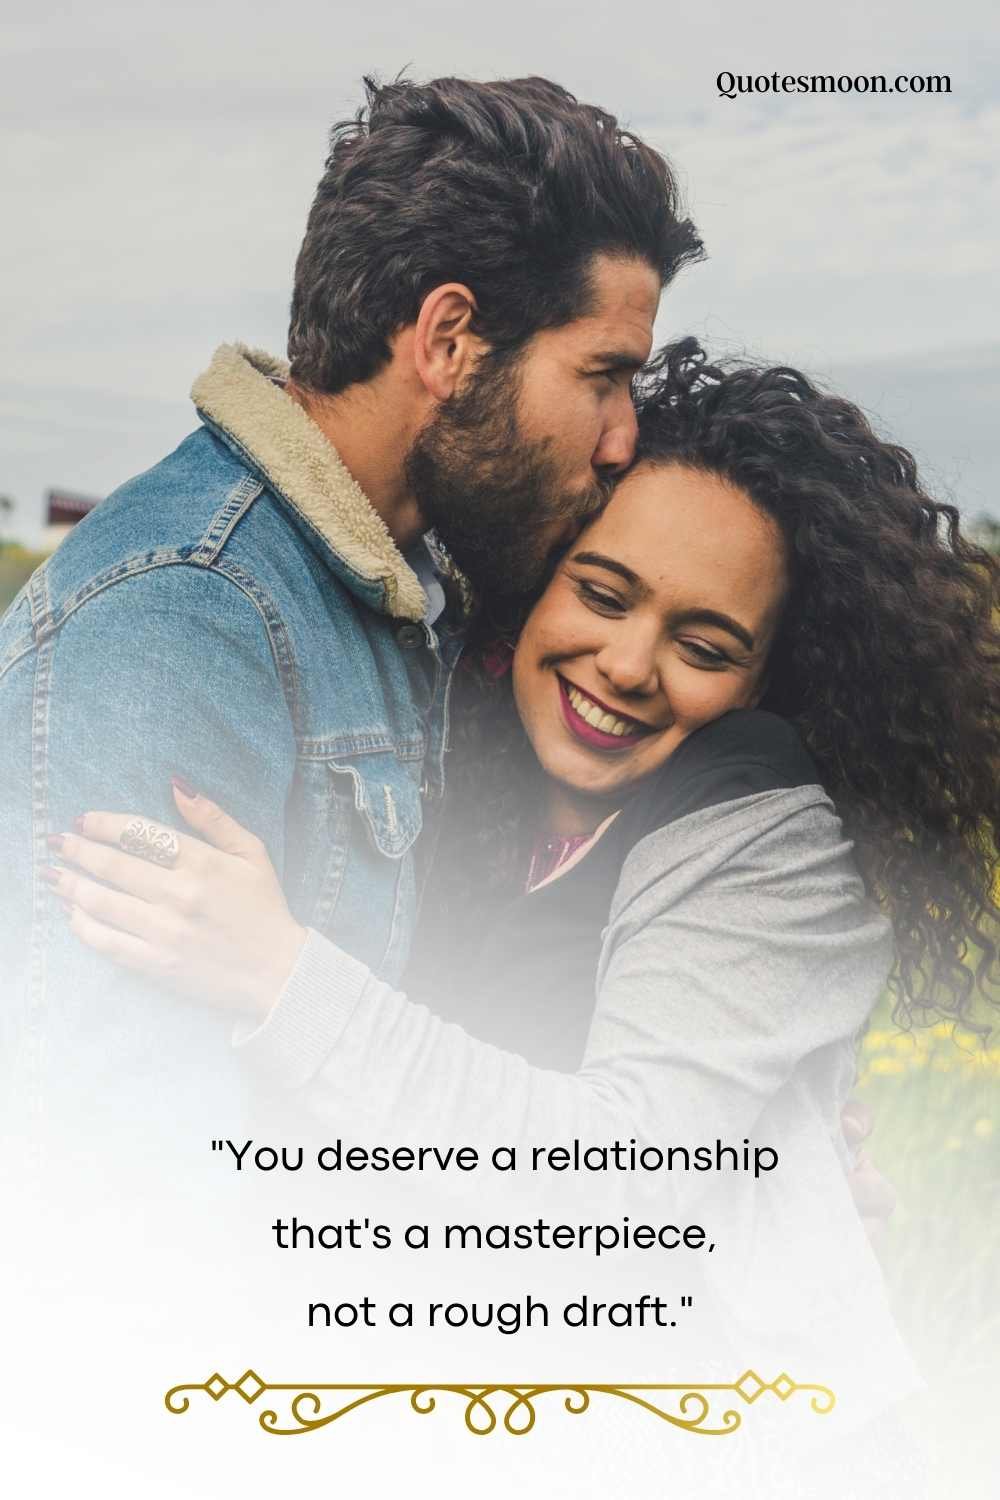 Romantic relationship you deserve better quotes for her tagalog images